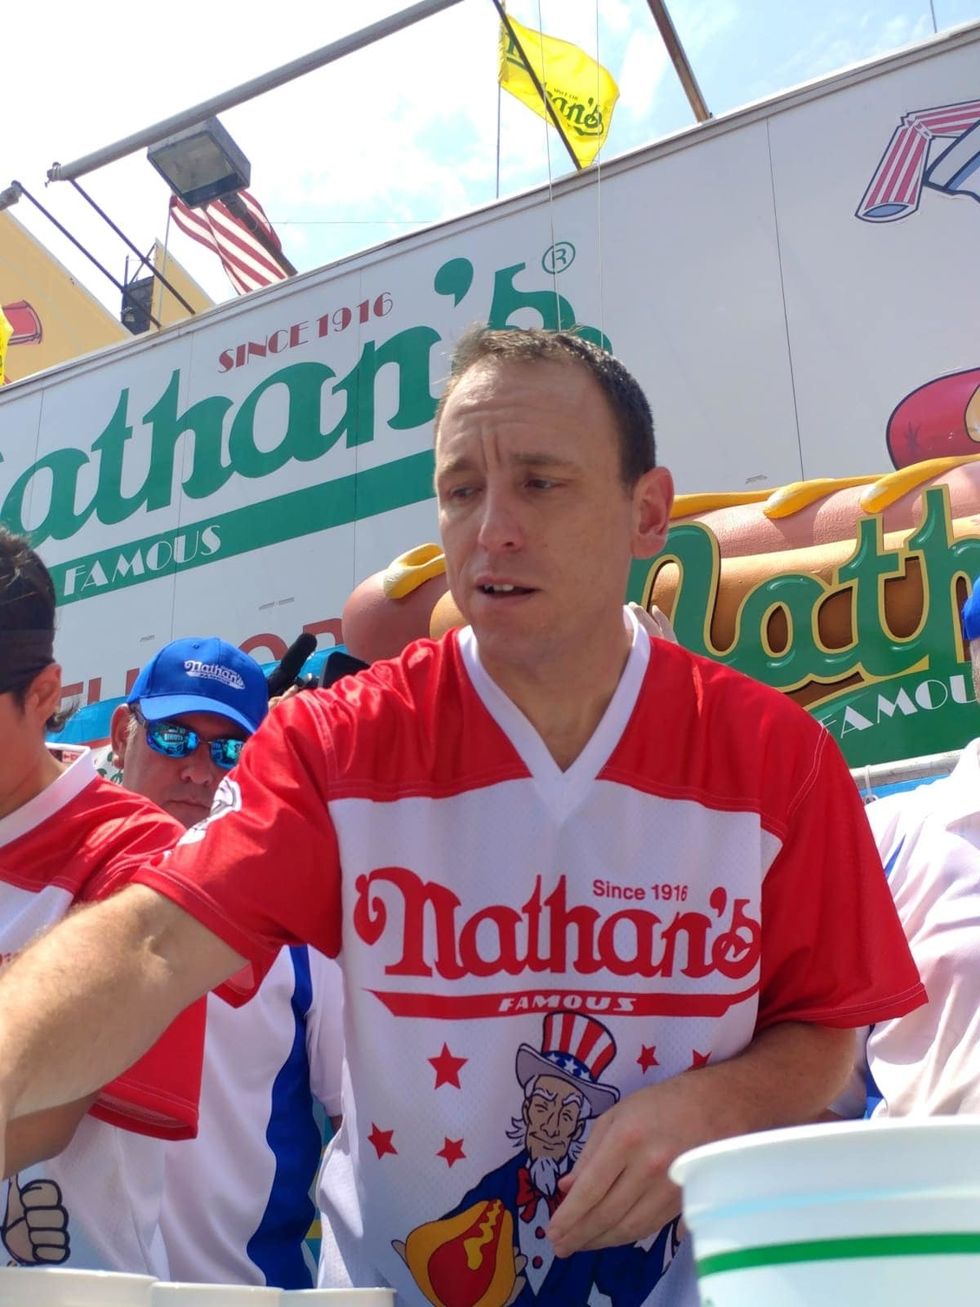 Ken Hoffman's inside scoop on hot dog king Joey Chestnut's controversial Nathan's Famous world record